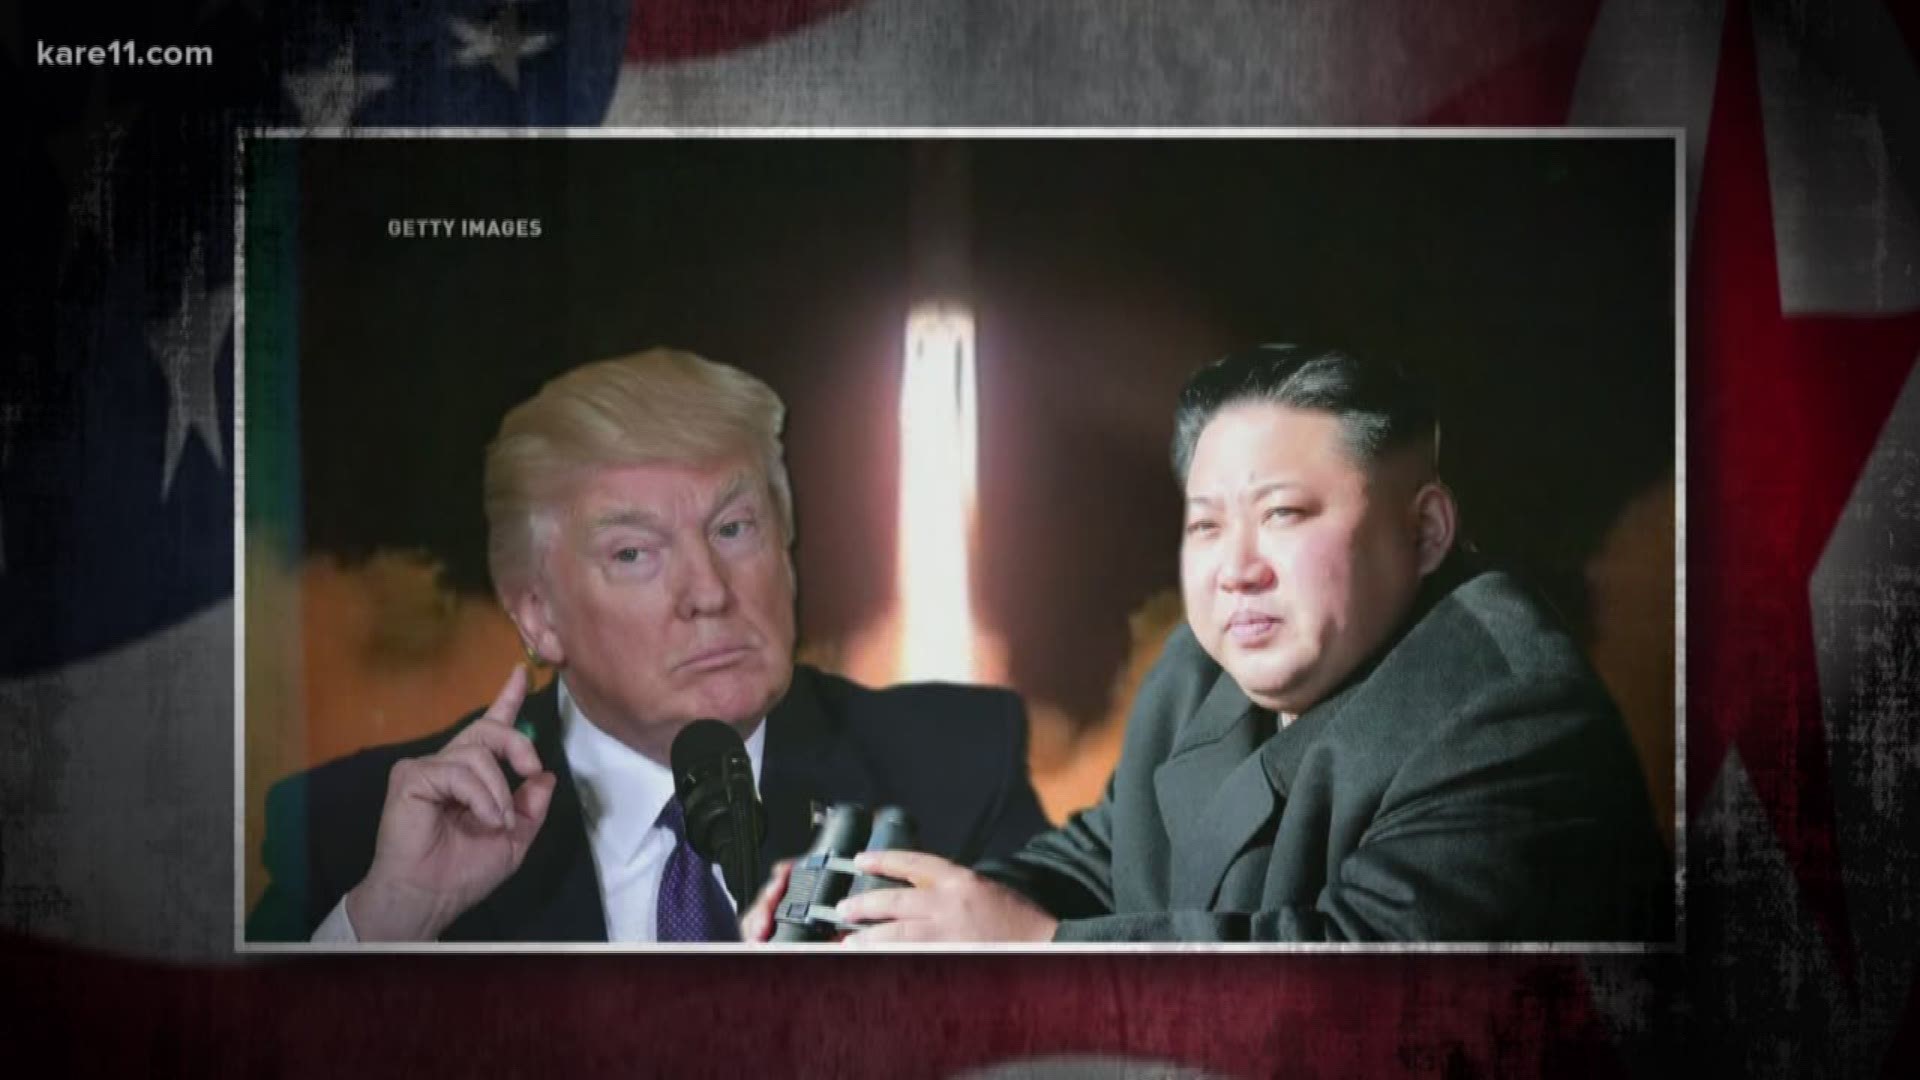 President Trump said the reason for the cancellation was 'the tremendous anger and open hostility displayed' by North Korea in recent days. https://kare11.tv/2klwJ3w